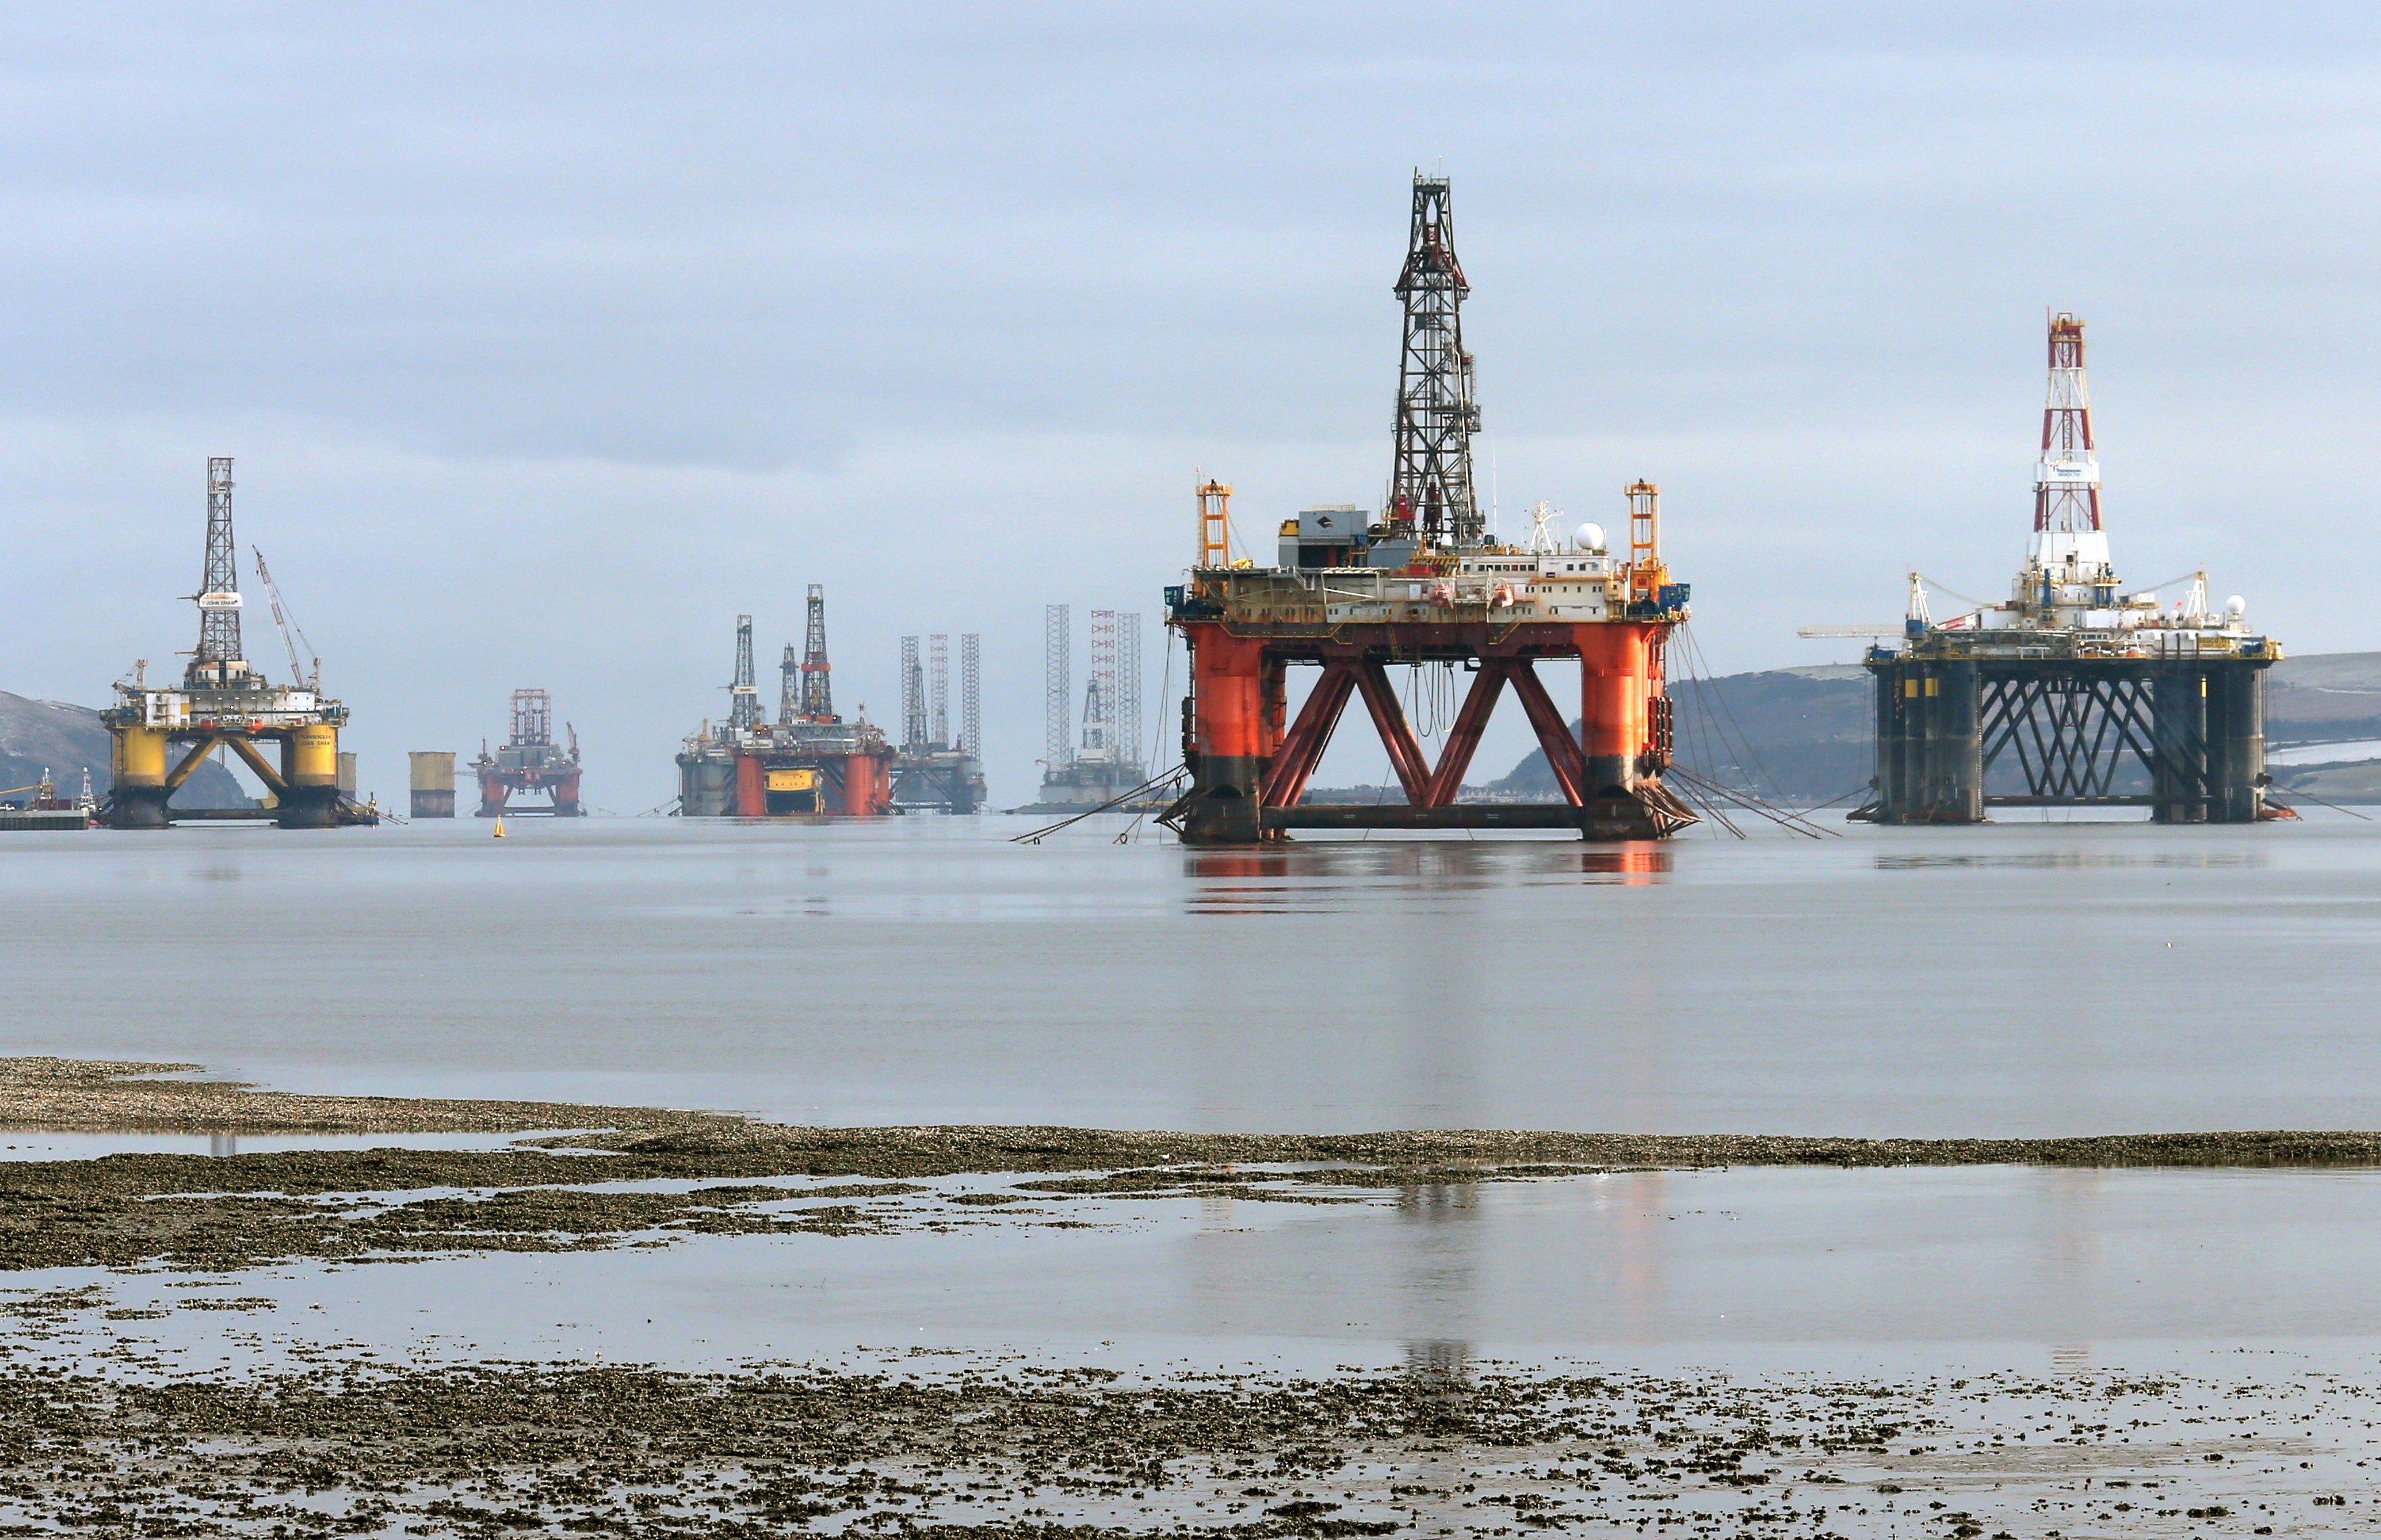 The North Sea oil and gas industry is on track to meet early emissions reduction targets, according to the North Sea Transition Authority (Andrew Milligan/PA)